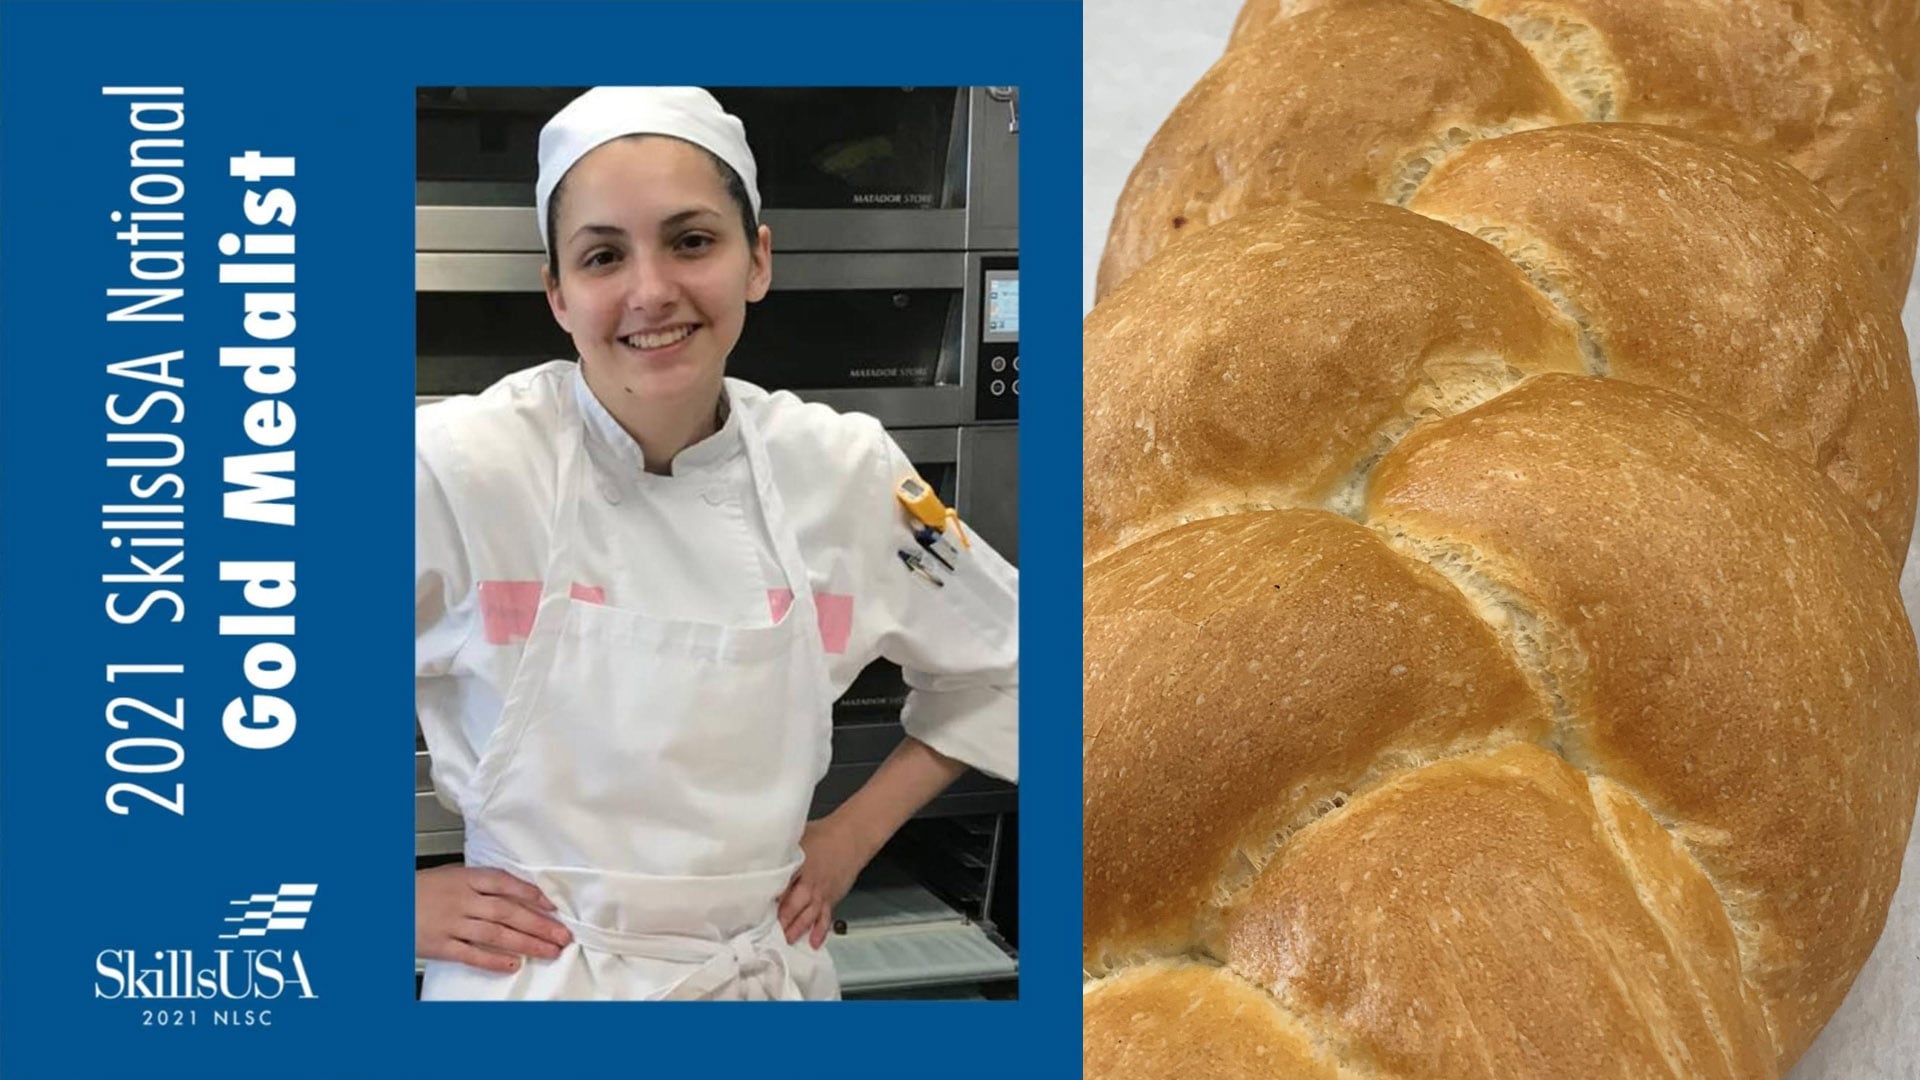 image of Amanda Gray in her chef's uniform appearing next to the bread she baked